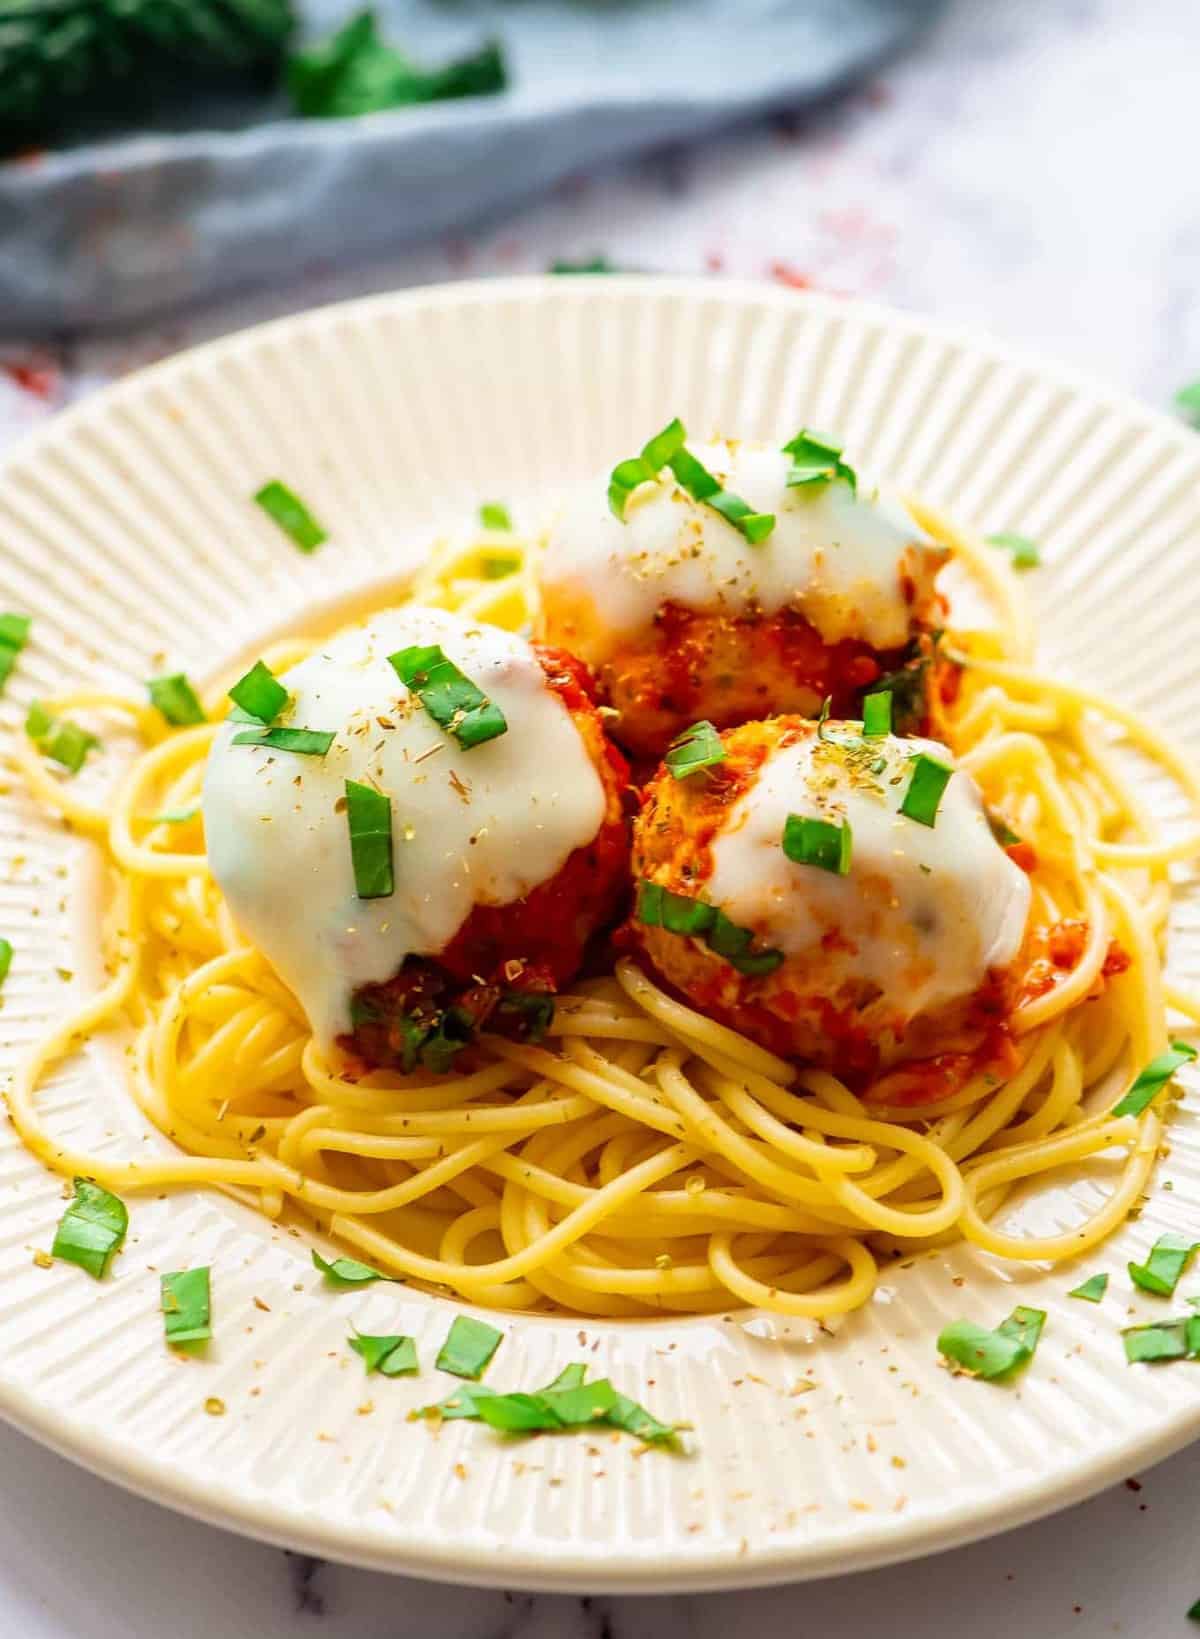 three cheesy chicken meatballs on a plate over pasta